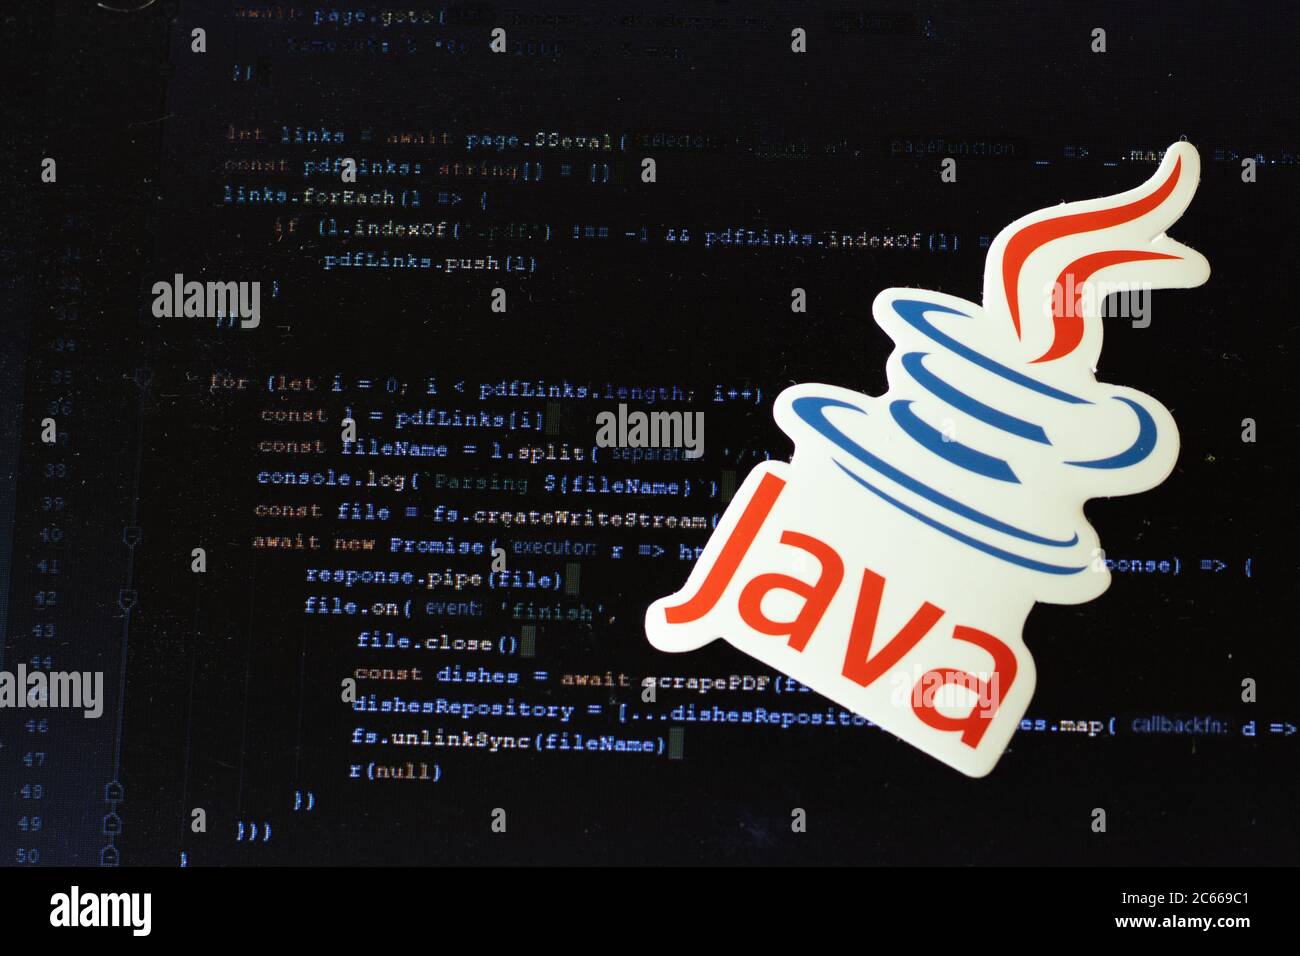 Moscow, Russia - 1 June 2020: Java logo sign with program code on background Illustrative Editorial Stock Photo